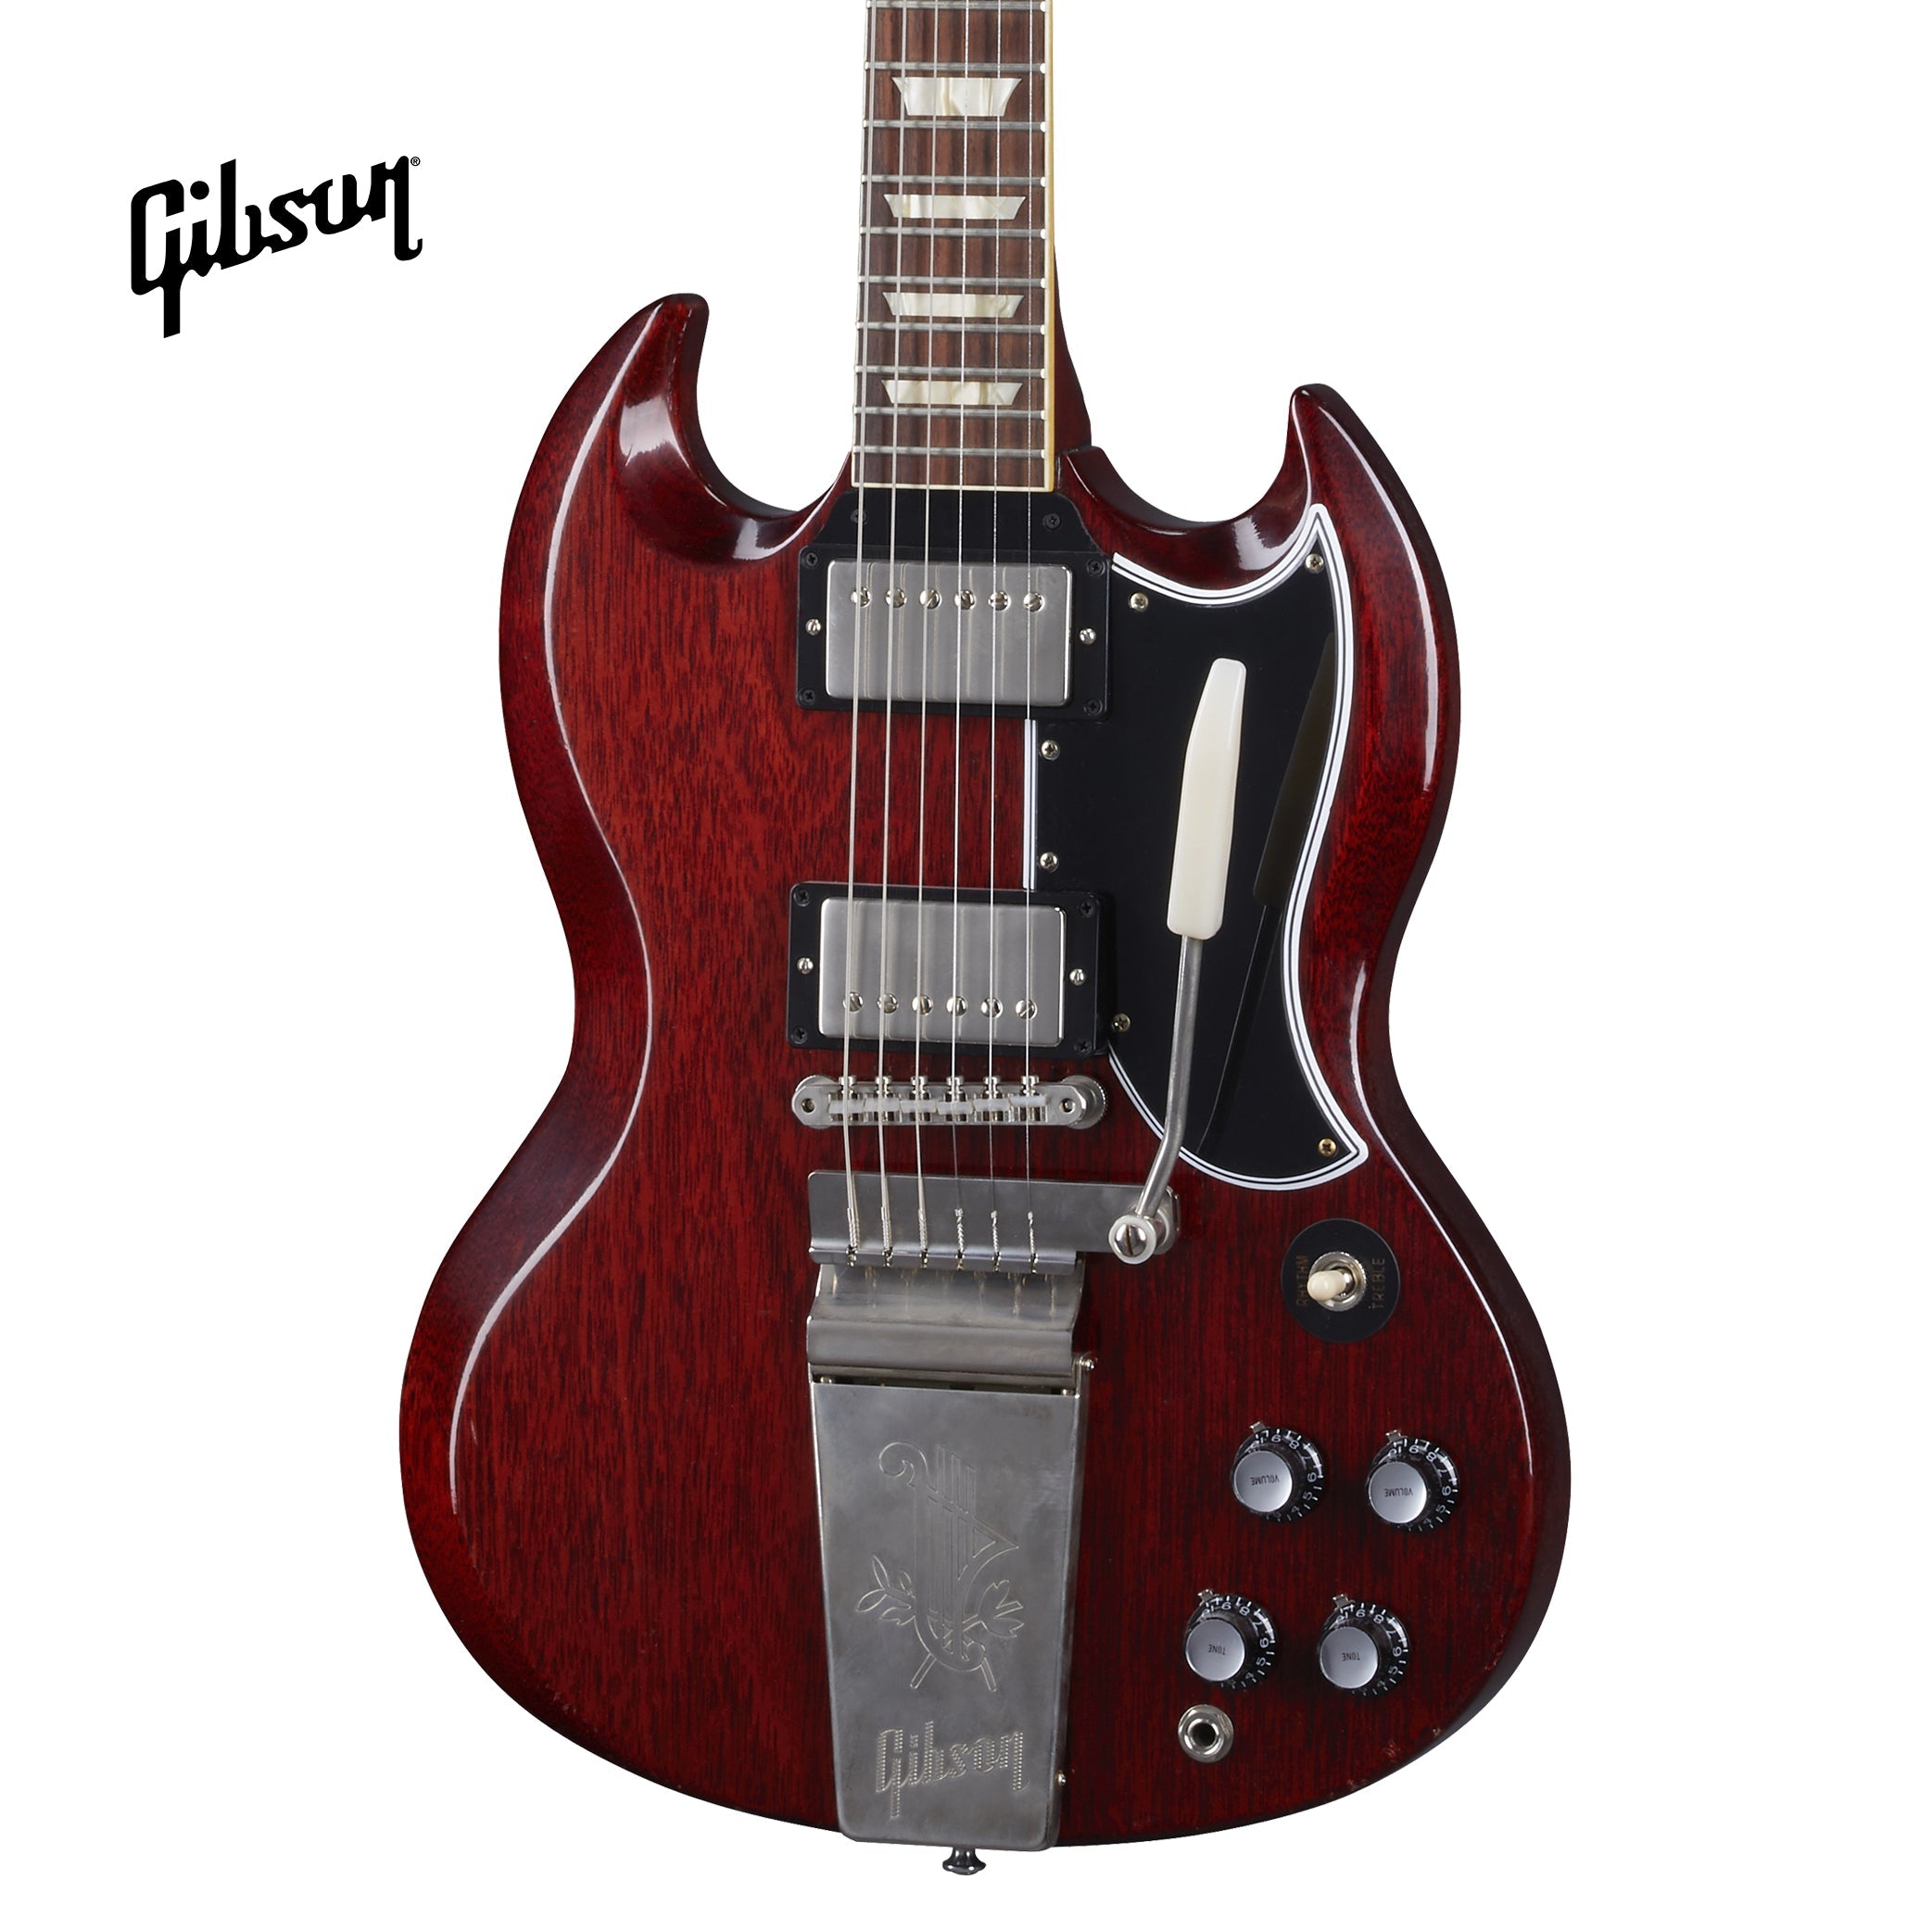 GIBSON 1964 SG STANDARD REISSUE W/ MAESTRO ULTRA LIGHT AGED ELECTRIC GUITAR - CHERRY RED